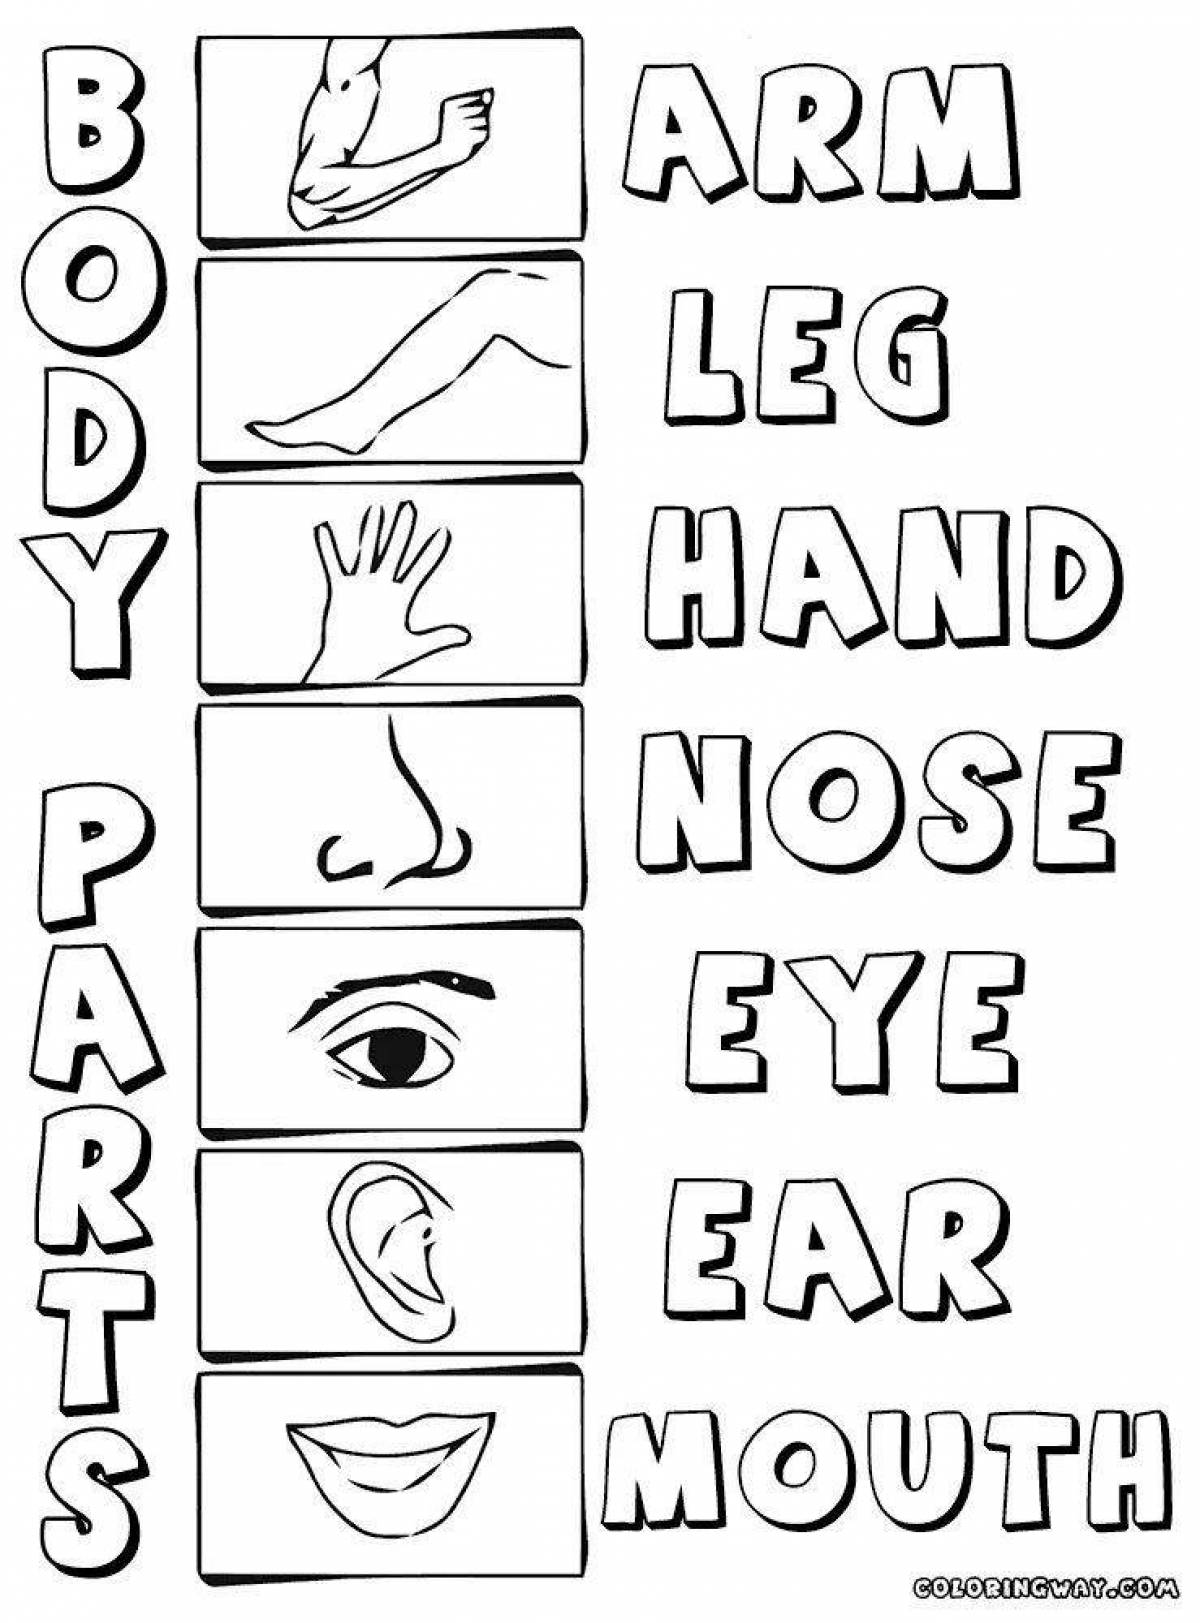 Entertaining coloring of body parts